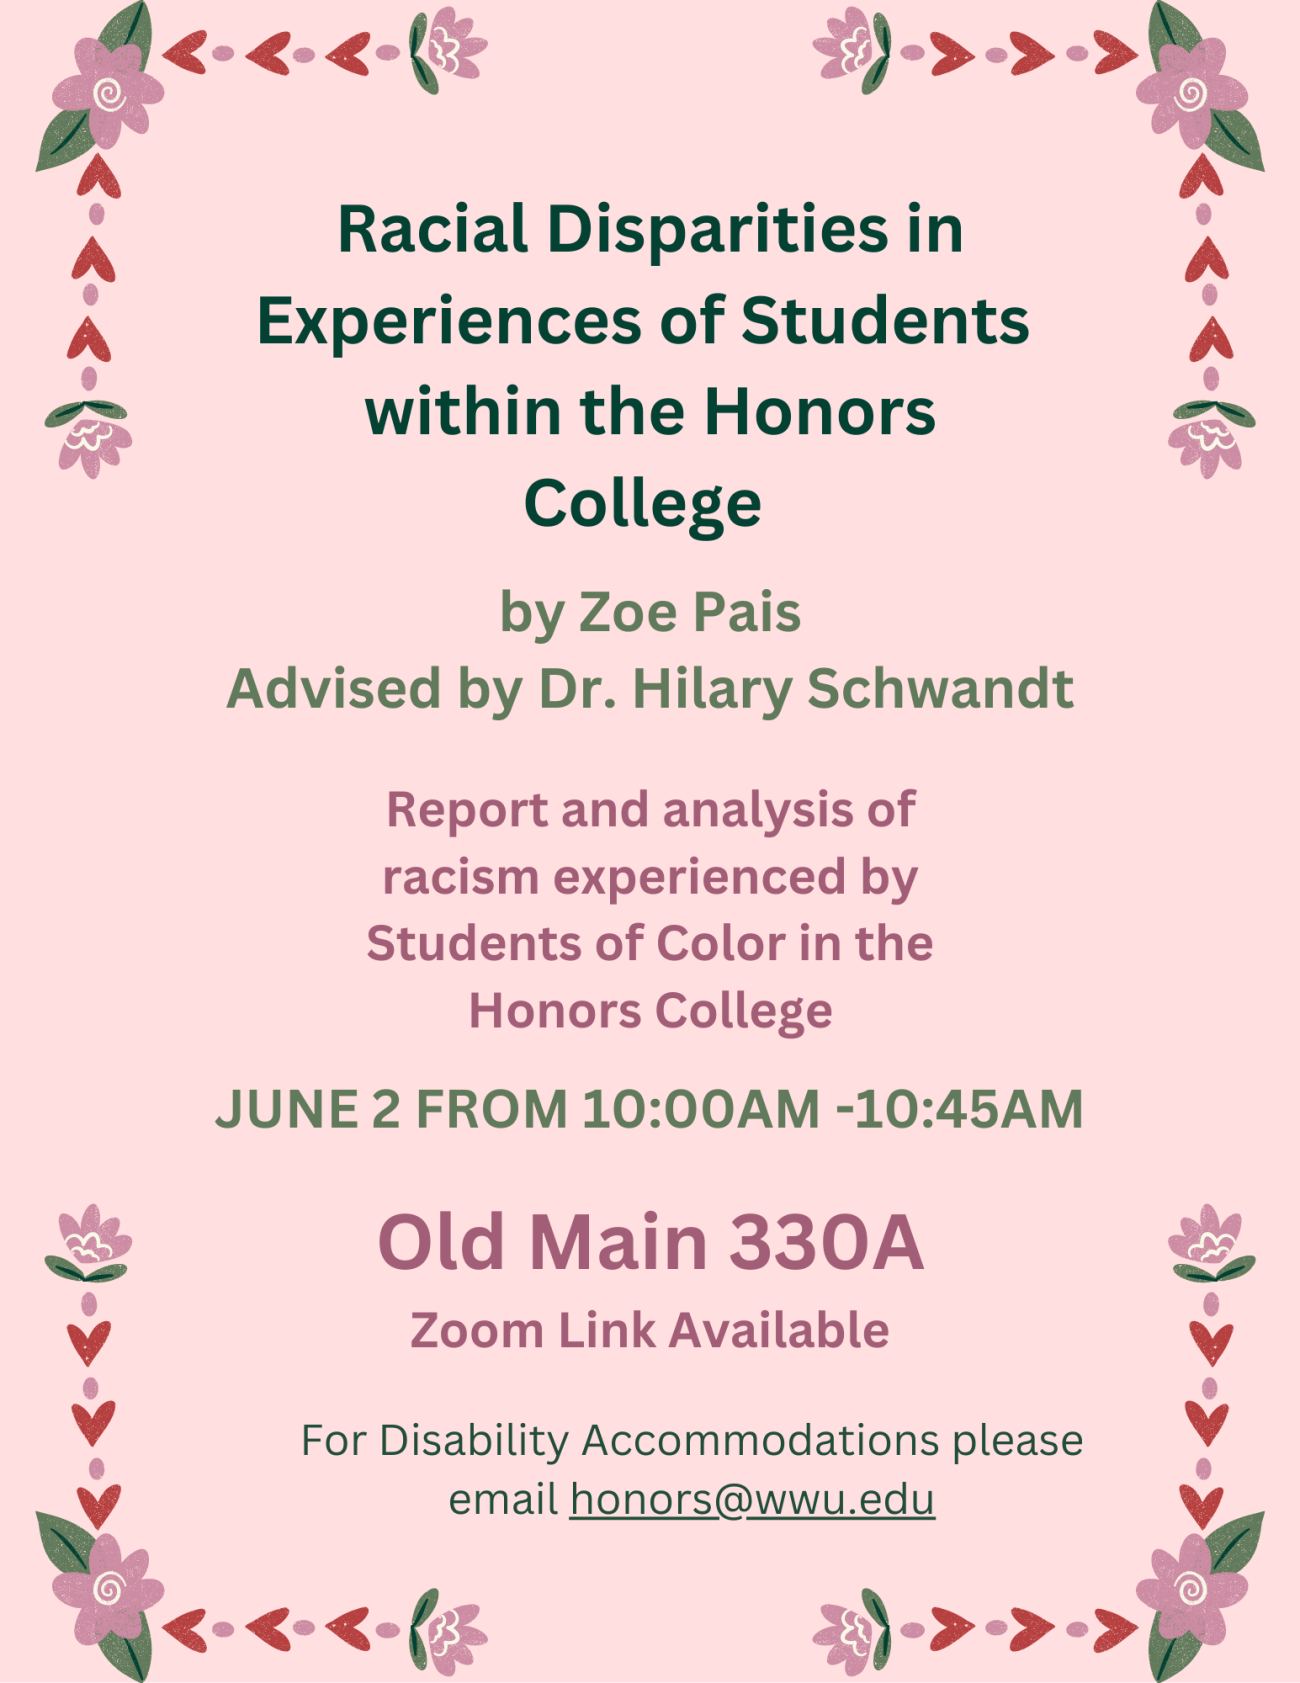 A poster with a pink background that has flowers around the borders. Text reads: "Racial Disparities in Experiences of Students within the Honors College by Zoe Pais, Advised by Dr. Hilary Schwandt. Report and analysis of racism experienced by Students of Color in the Honors College. June 2 from 10:00AM-10:45AM, Old Main 330A Zoom Link Available, For Disability Accommodations please email honors@wwu.edu."